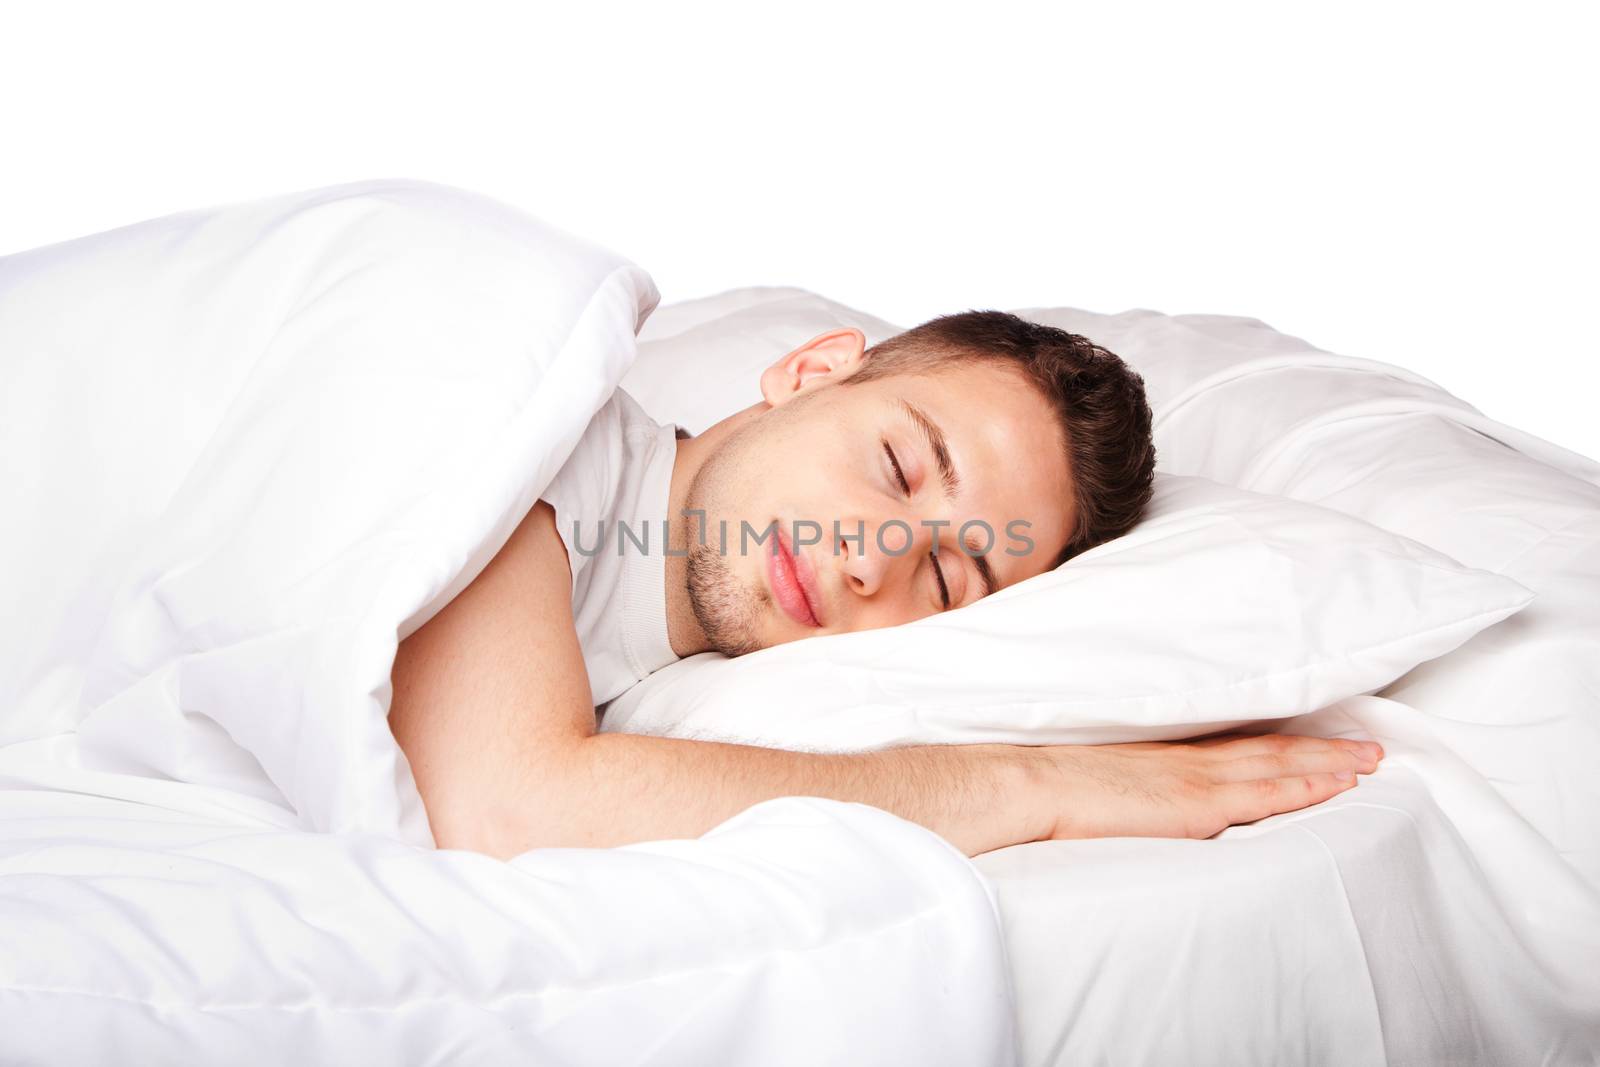 Handsome young man happily sleeping in white bed, isolated.